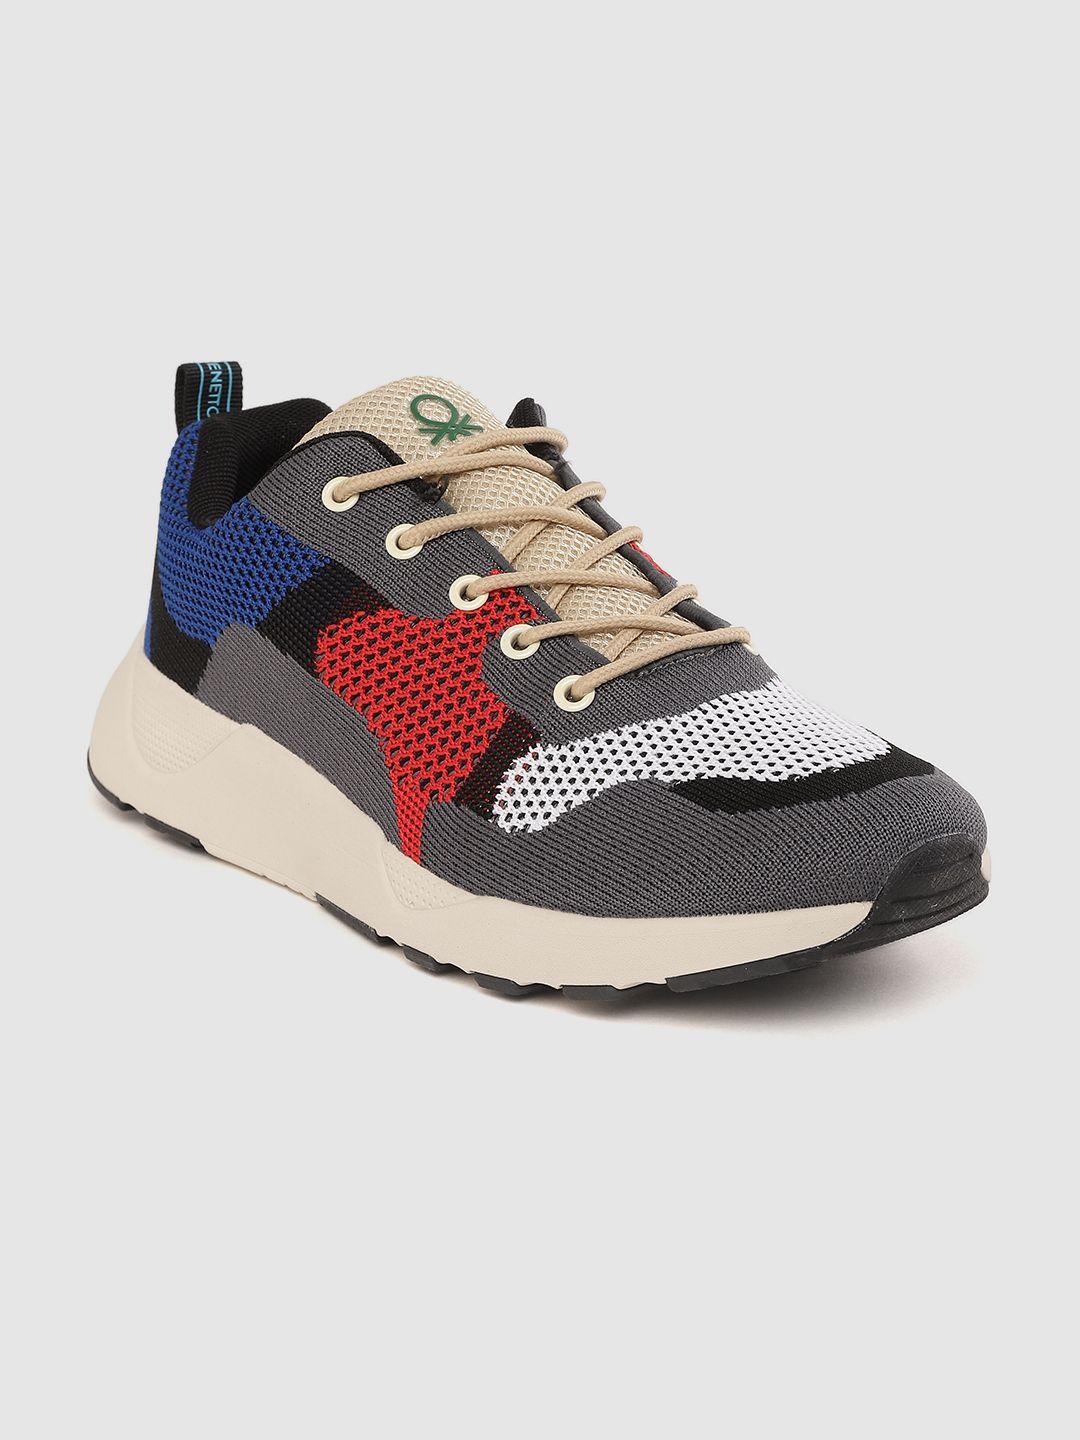 united colors of benetton men charcoal grey & red colourblocked sneakers